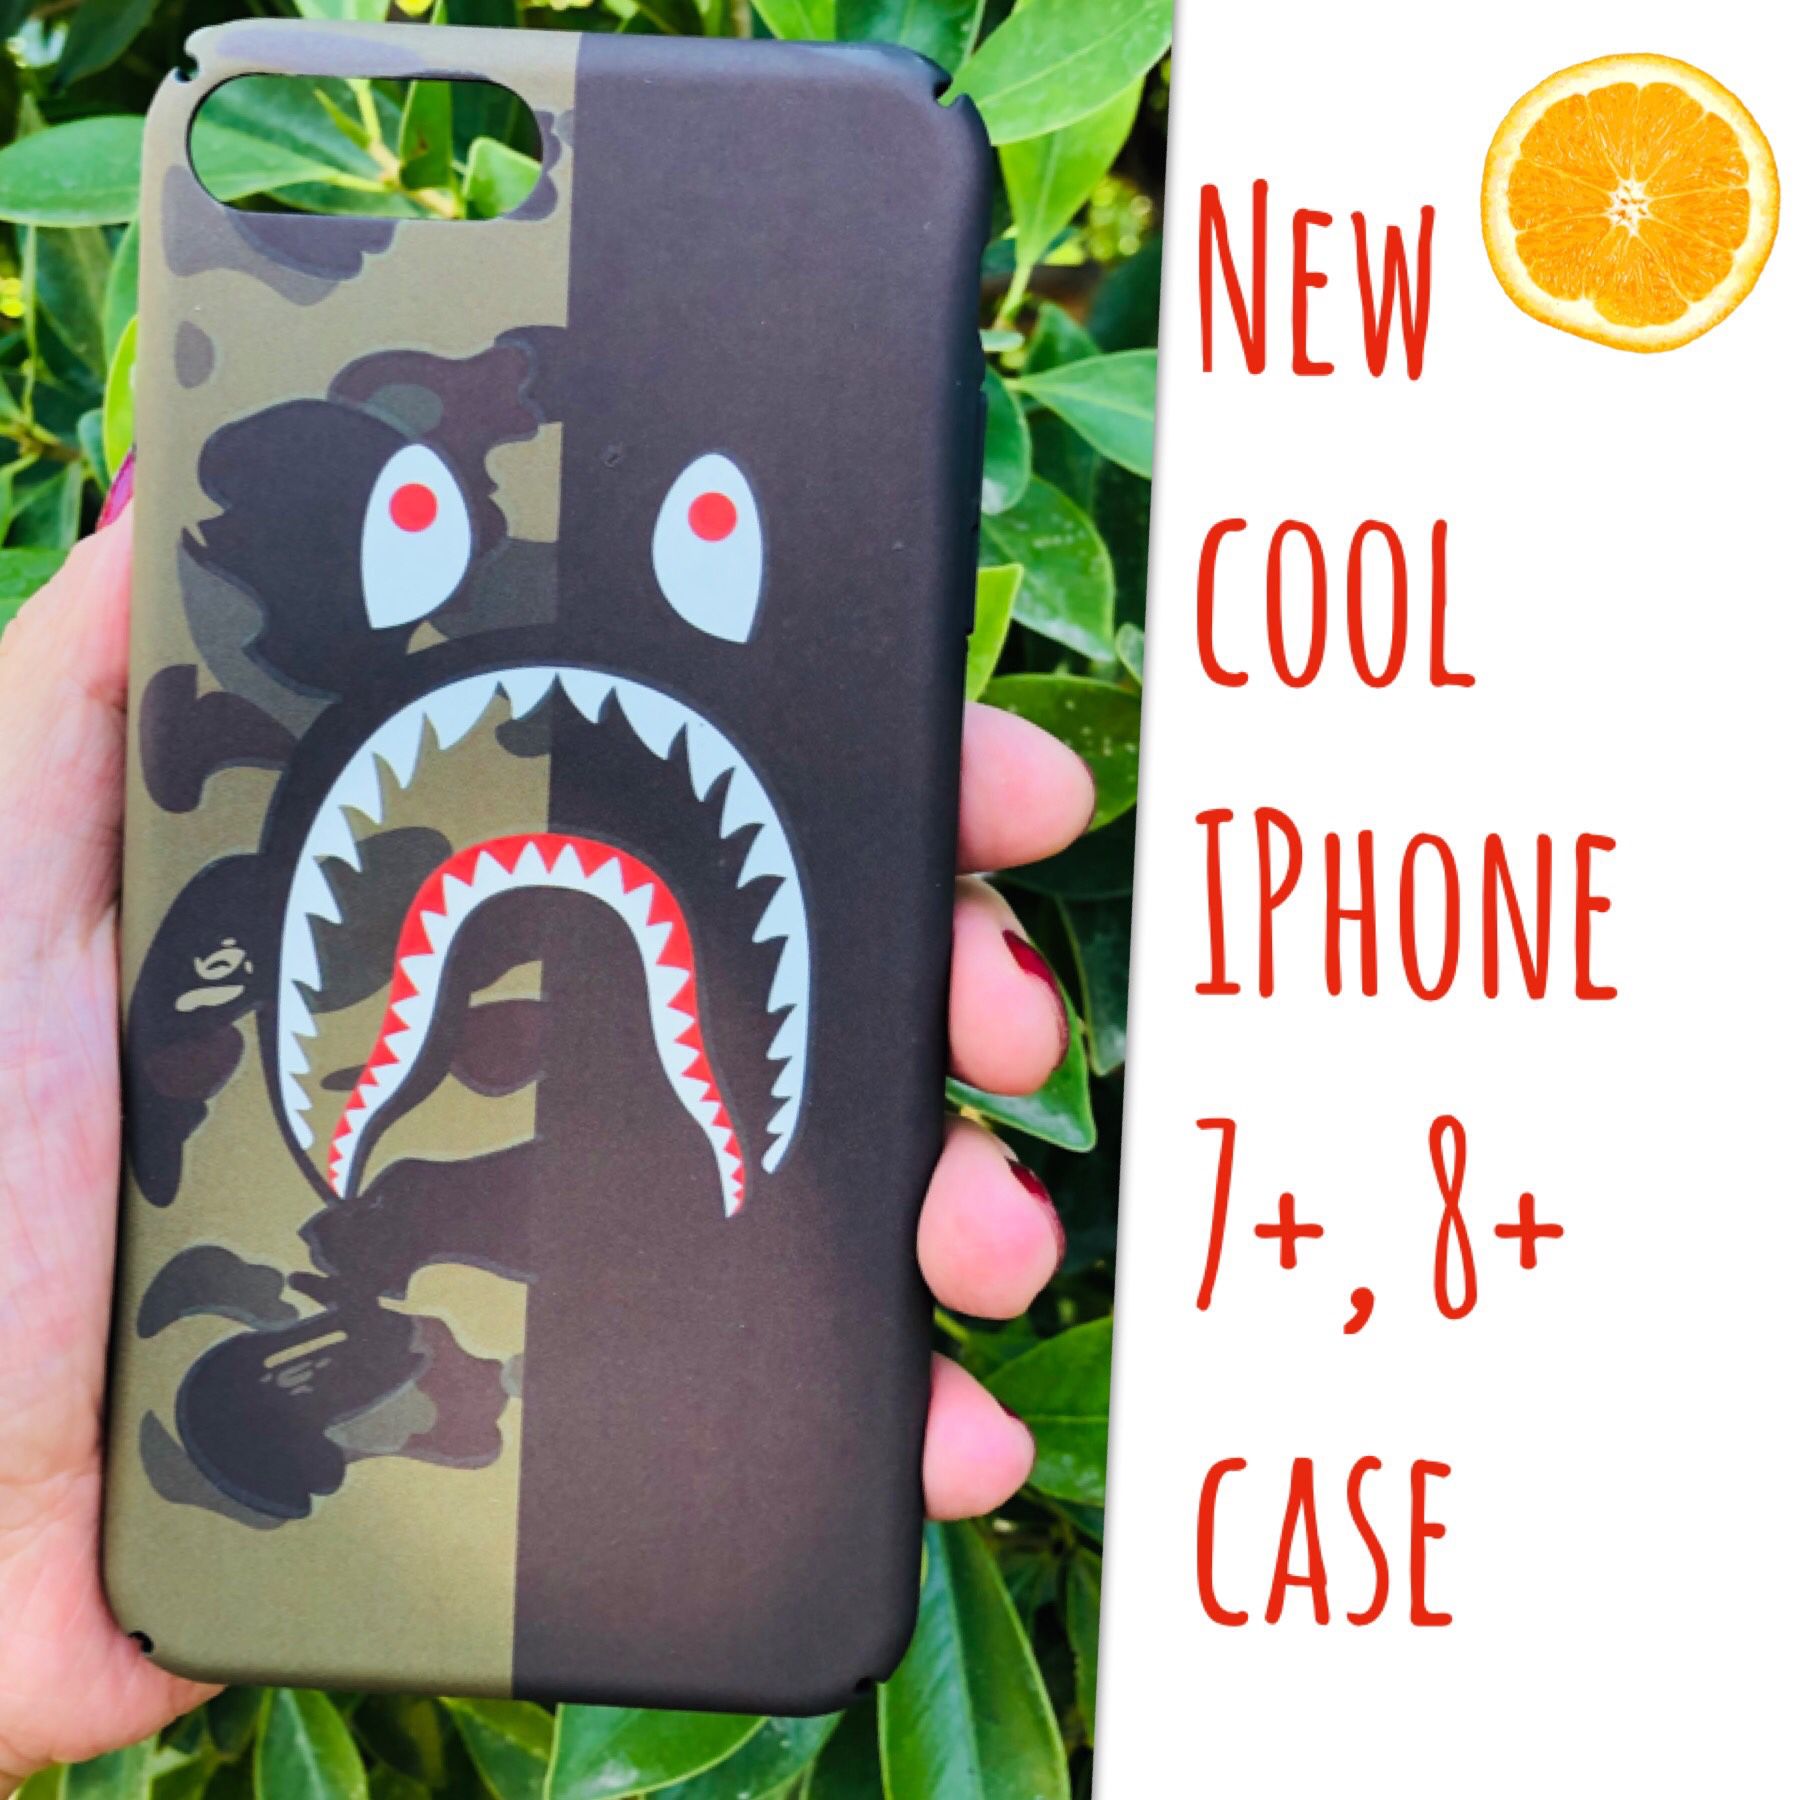 New cool iphone 7+ or iphone 8+ PLUS case slim fit plastic sleeve case bape aape camo hypebeast hype swag men’s guys